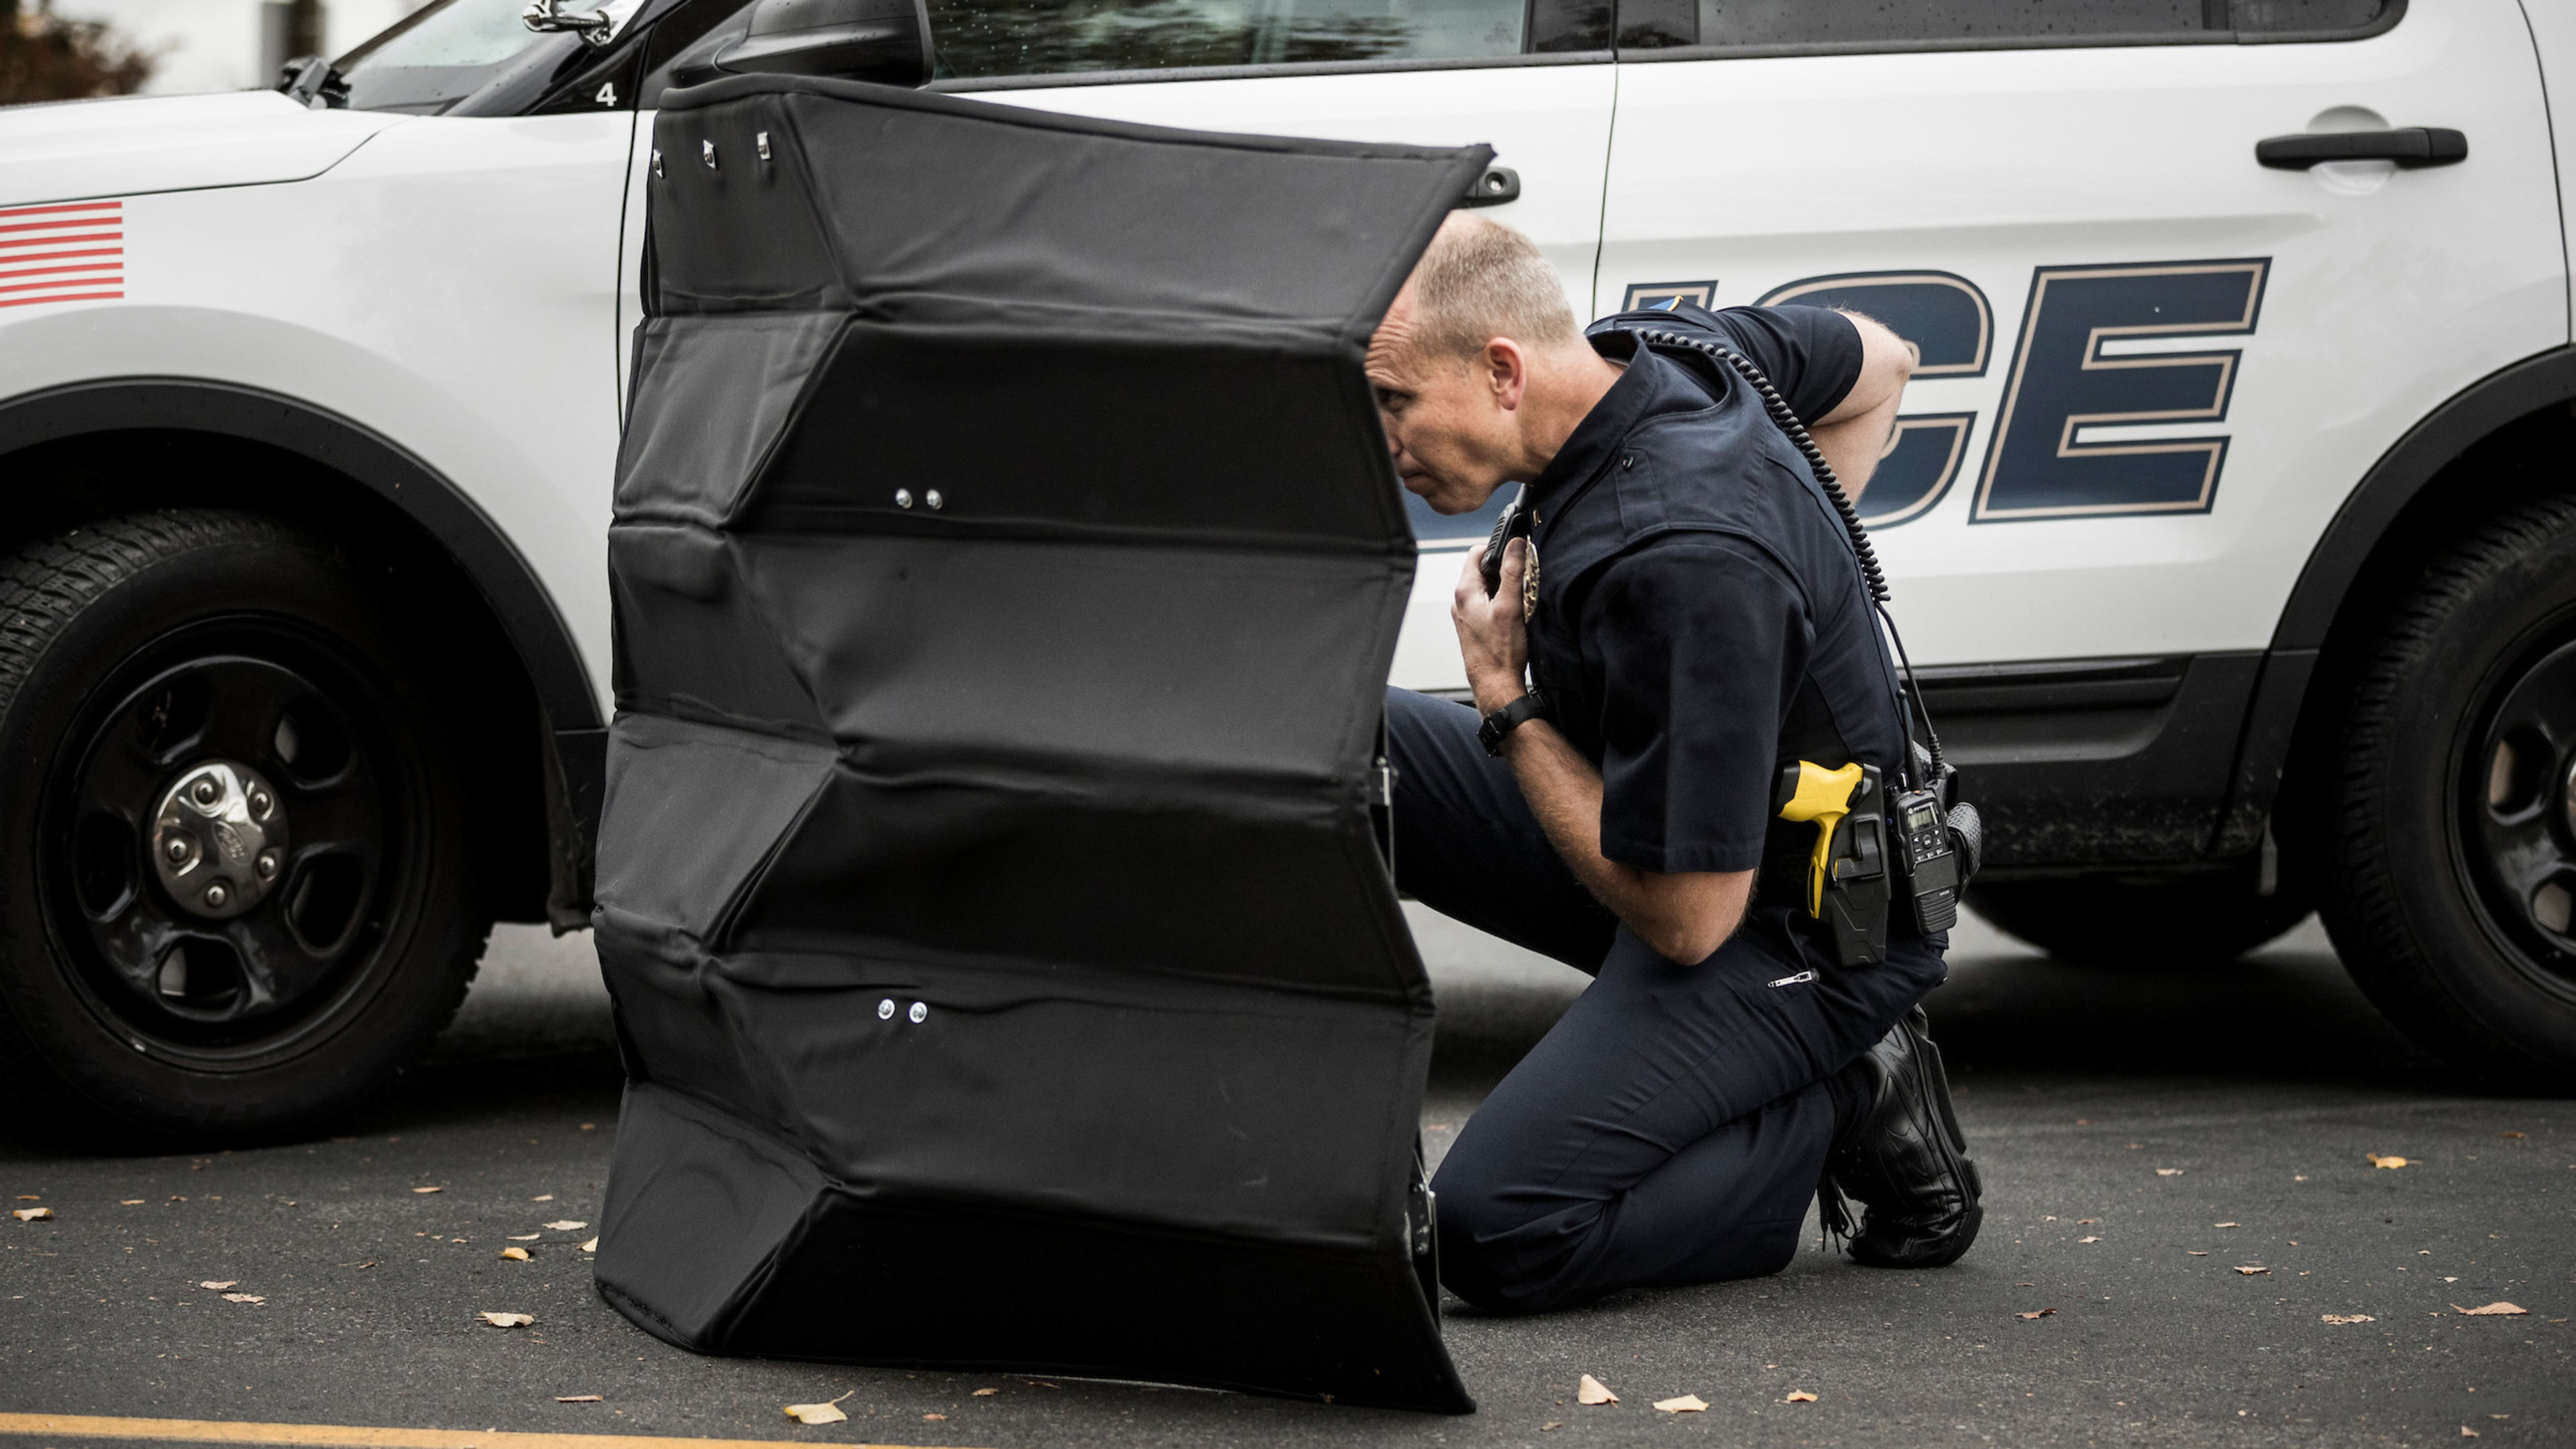 This Bulletproof Shield Is Inspired By Japanese Origami